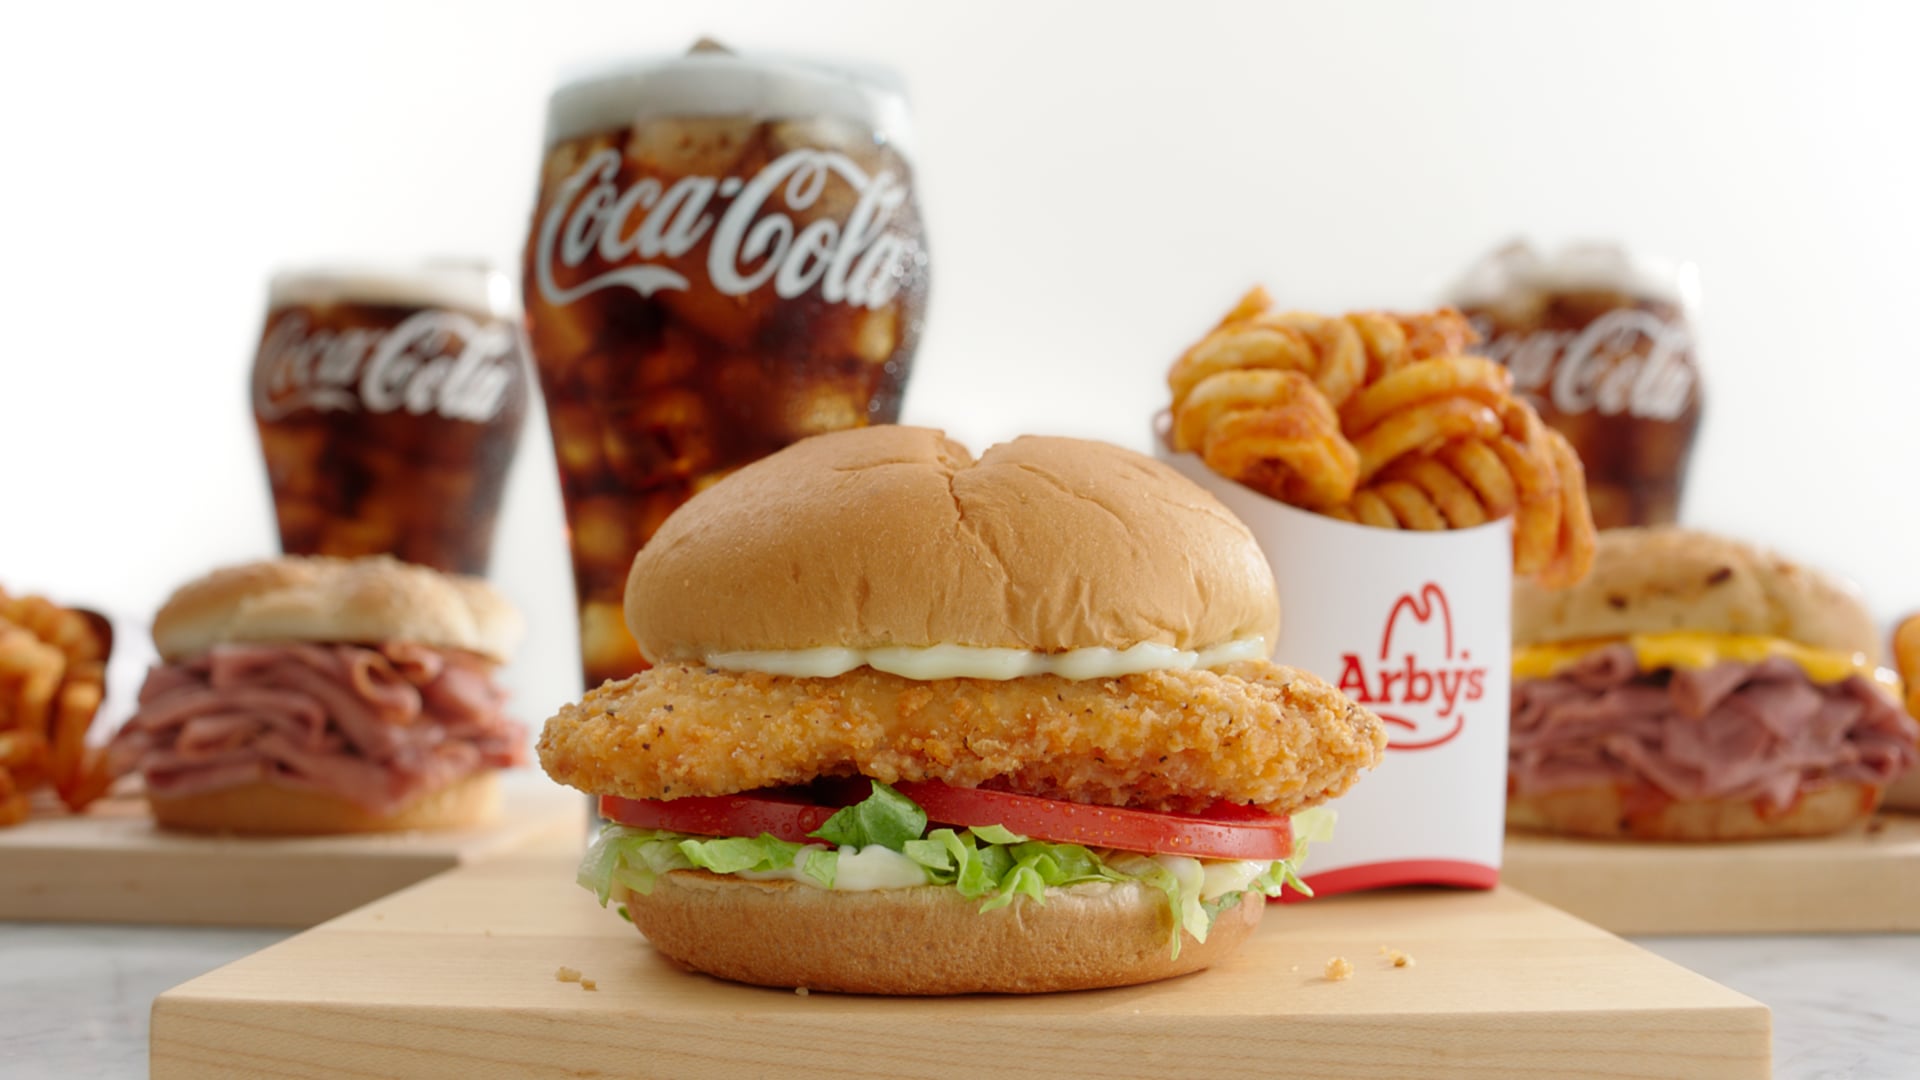 Arby's "Why Its Best"